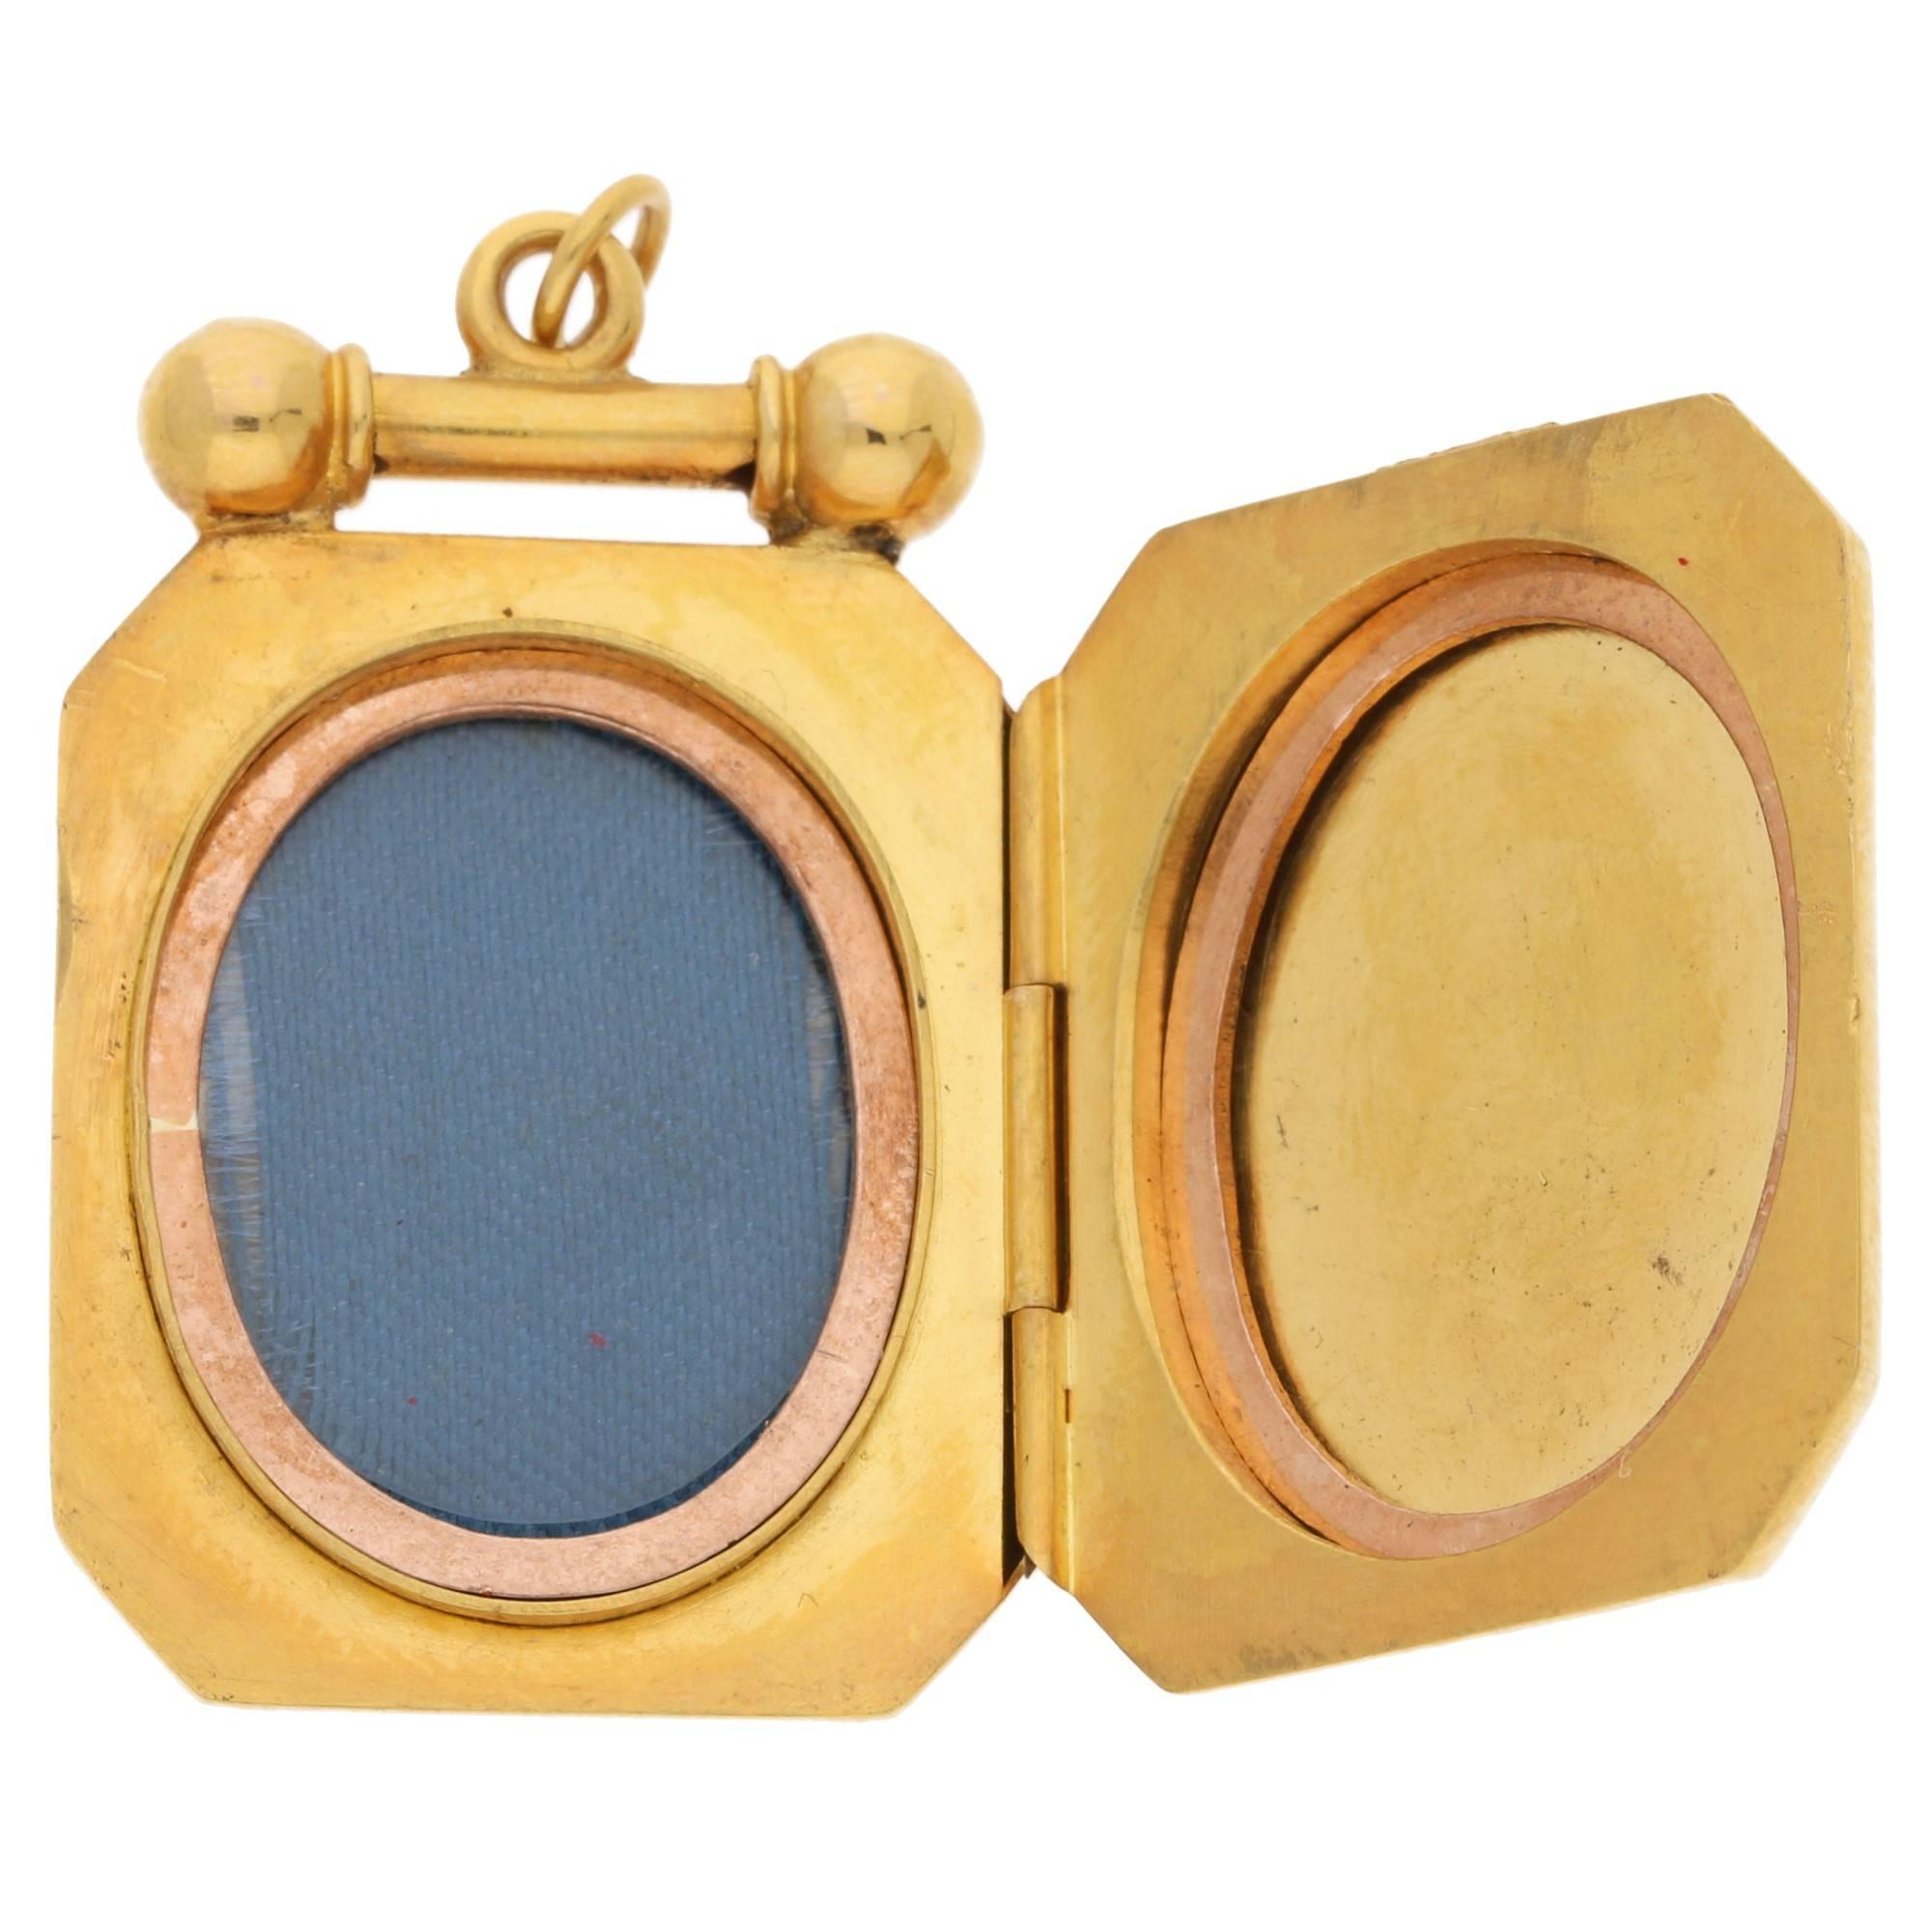 A Victorian unusually shaped 15k hallmarked yellow gold locket set with a diamond in the central motif. Diamond approximately 0.05cts. Opens to reveal two sections that would hold two small sentimental images. Clasp is very secure and in great